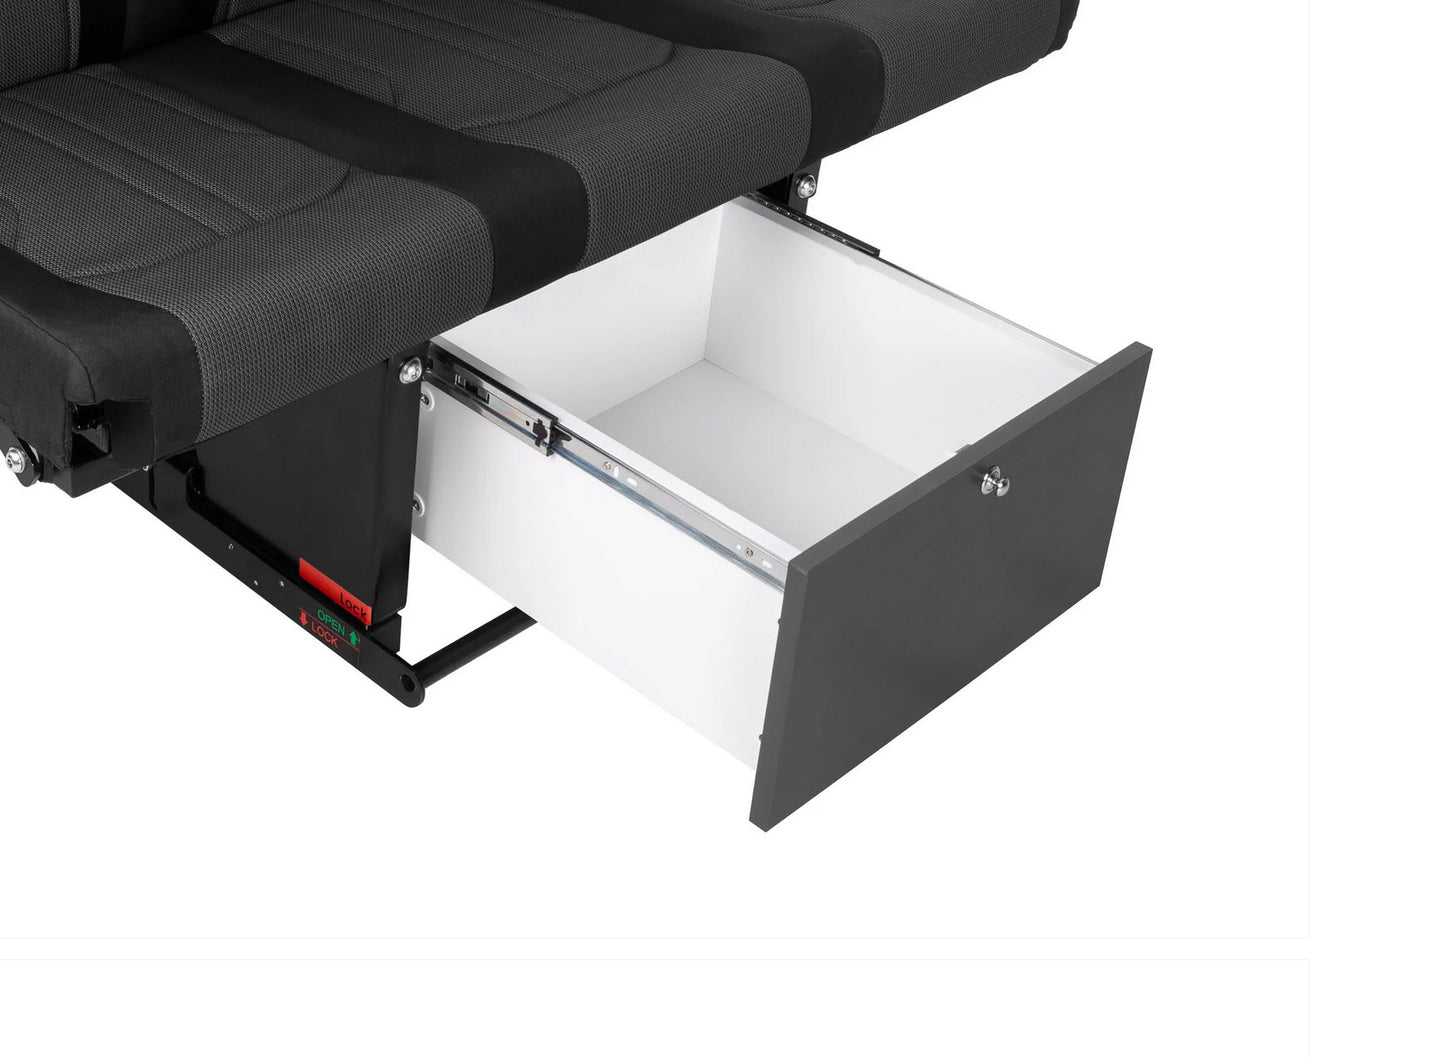 Seatbed Drawer